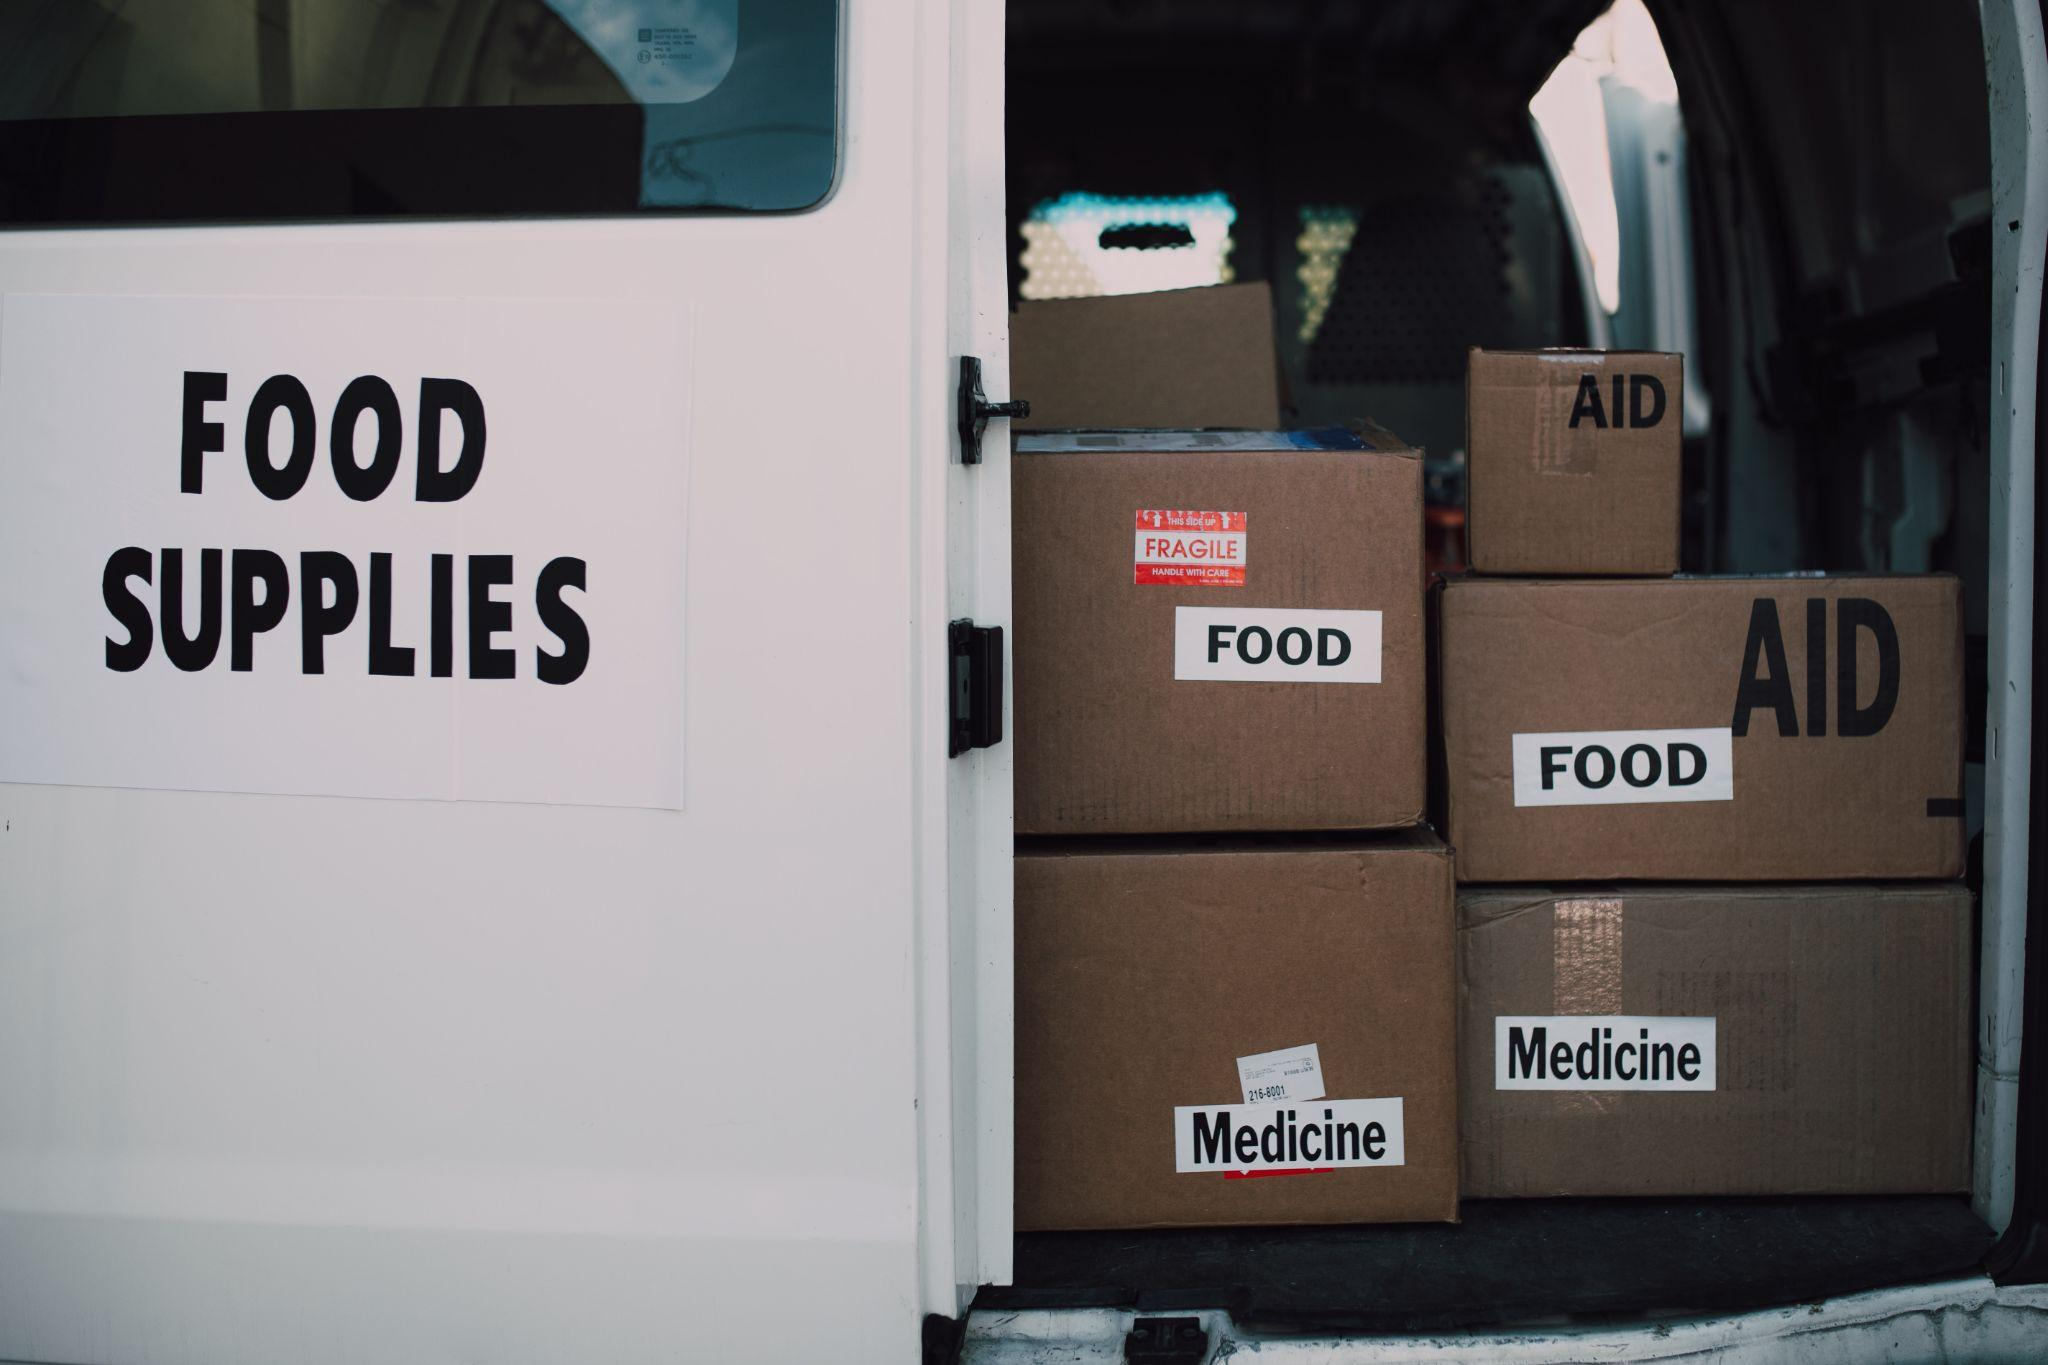 Food and medical supplies in a non-profit service van